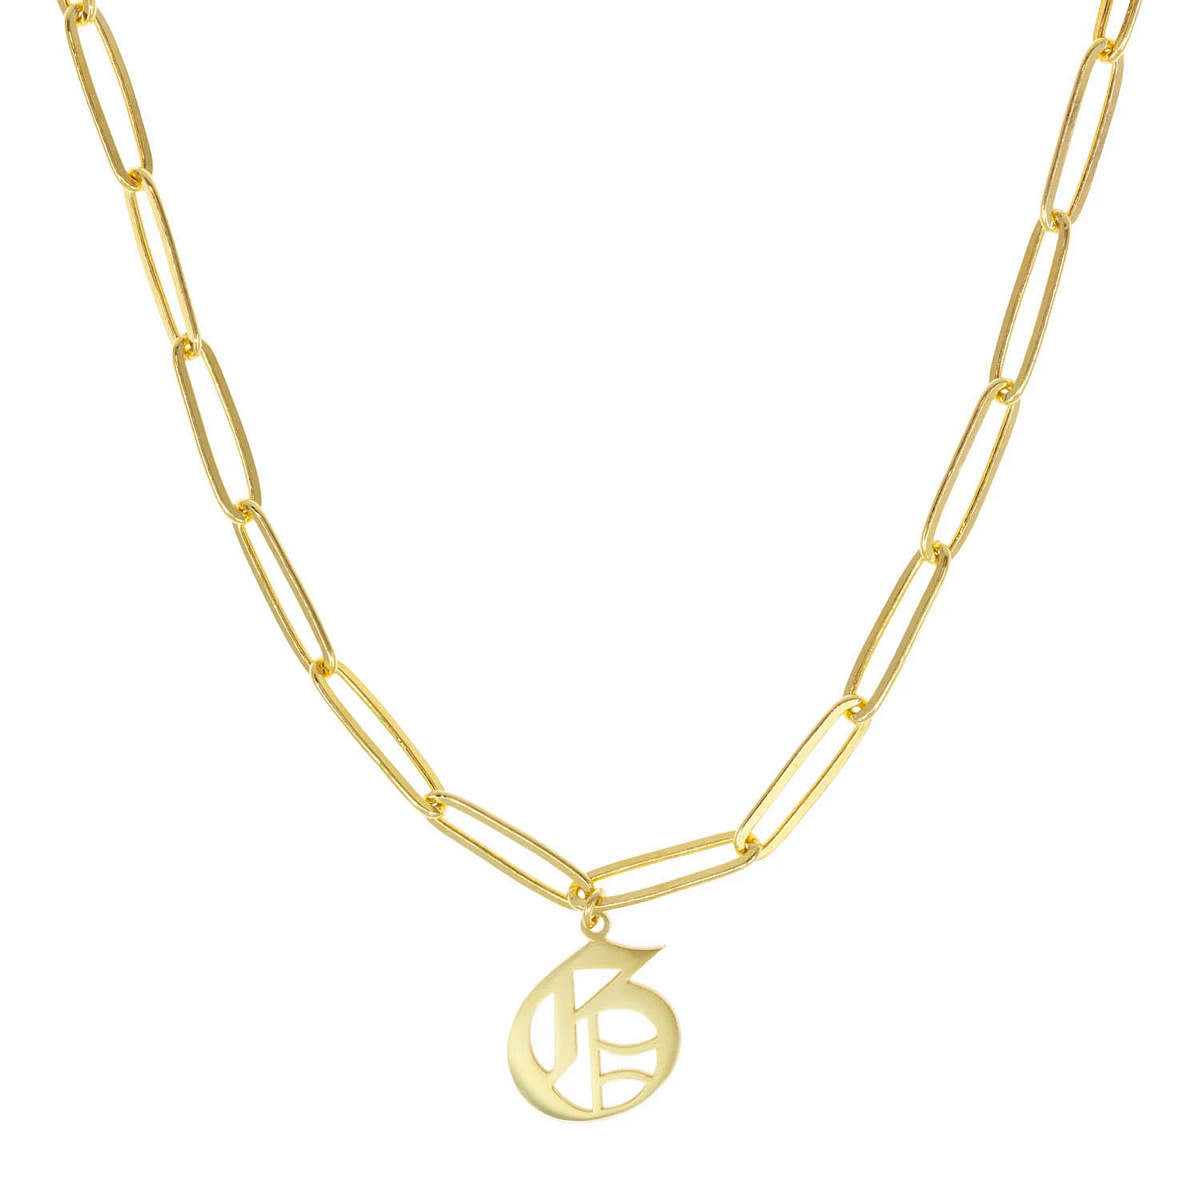 The One & Only Initial Necklace